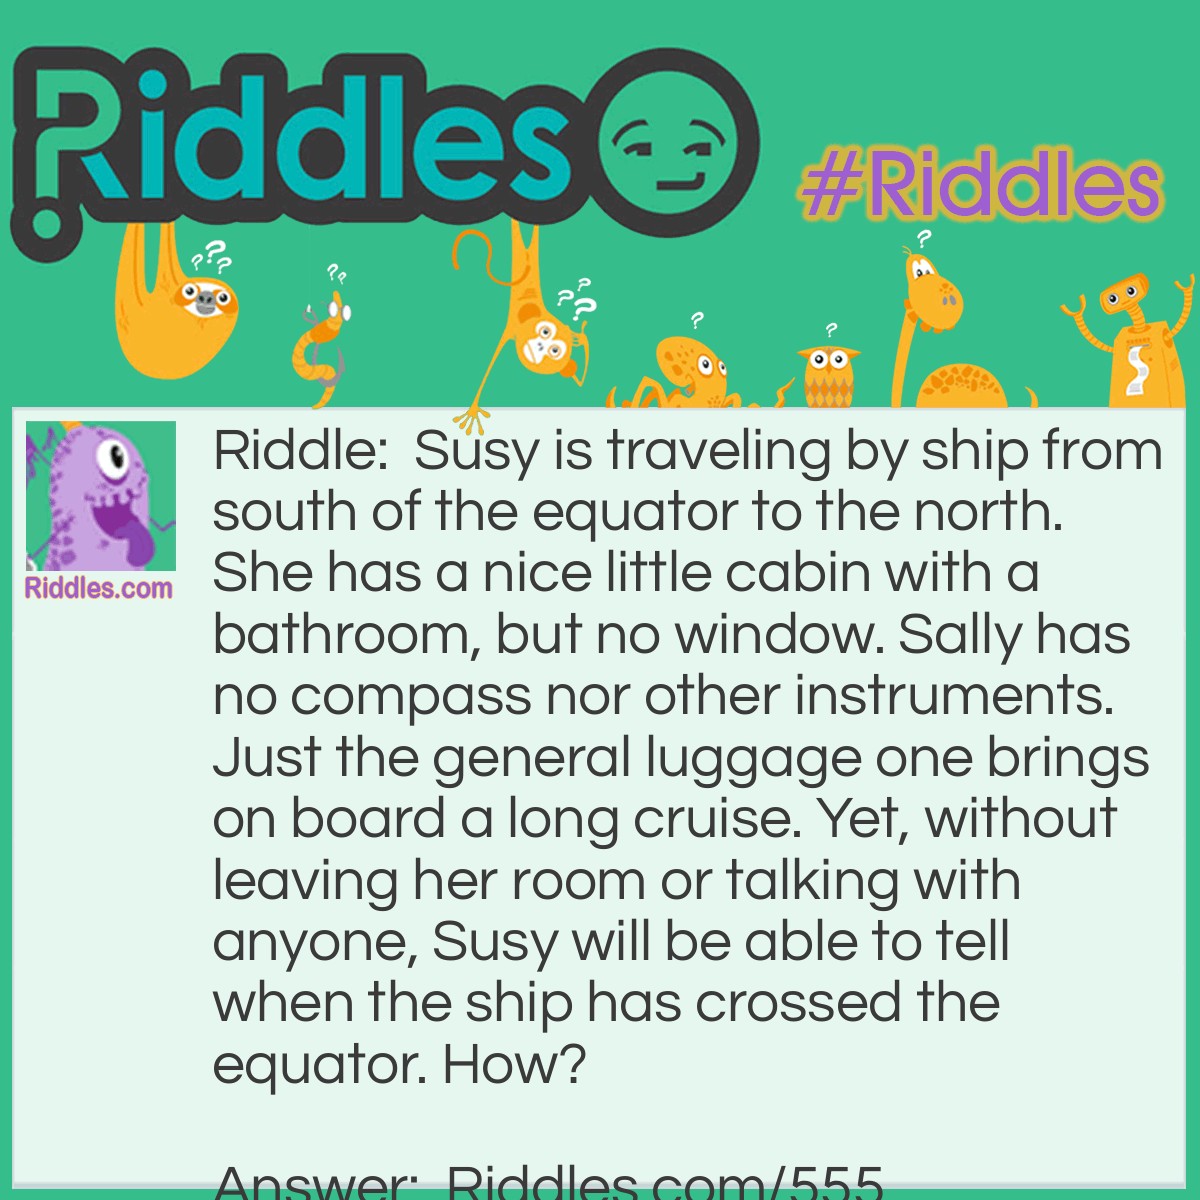 Riddle: Susy is traveling by ship from south of the equator to the north. She has a nice little cabin with a bathroom, but no window. Sally has no compass nor other instruments. Just the general luggage one brings on board a long cruise. Yet, without leaving her room or talking with anyone, Susy will be able to tell when the ship has crossed the equator. How? Answer: Susy can fill the sink and watch it drain. When the water reverses direction when going down the drain, she will know they have crossed the equator.